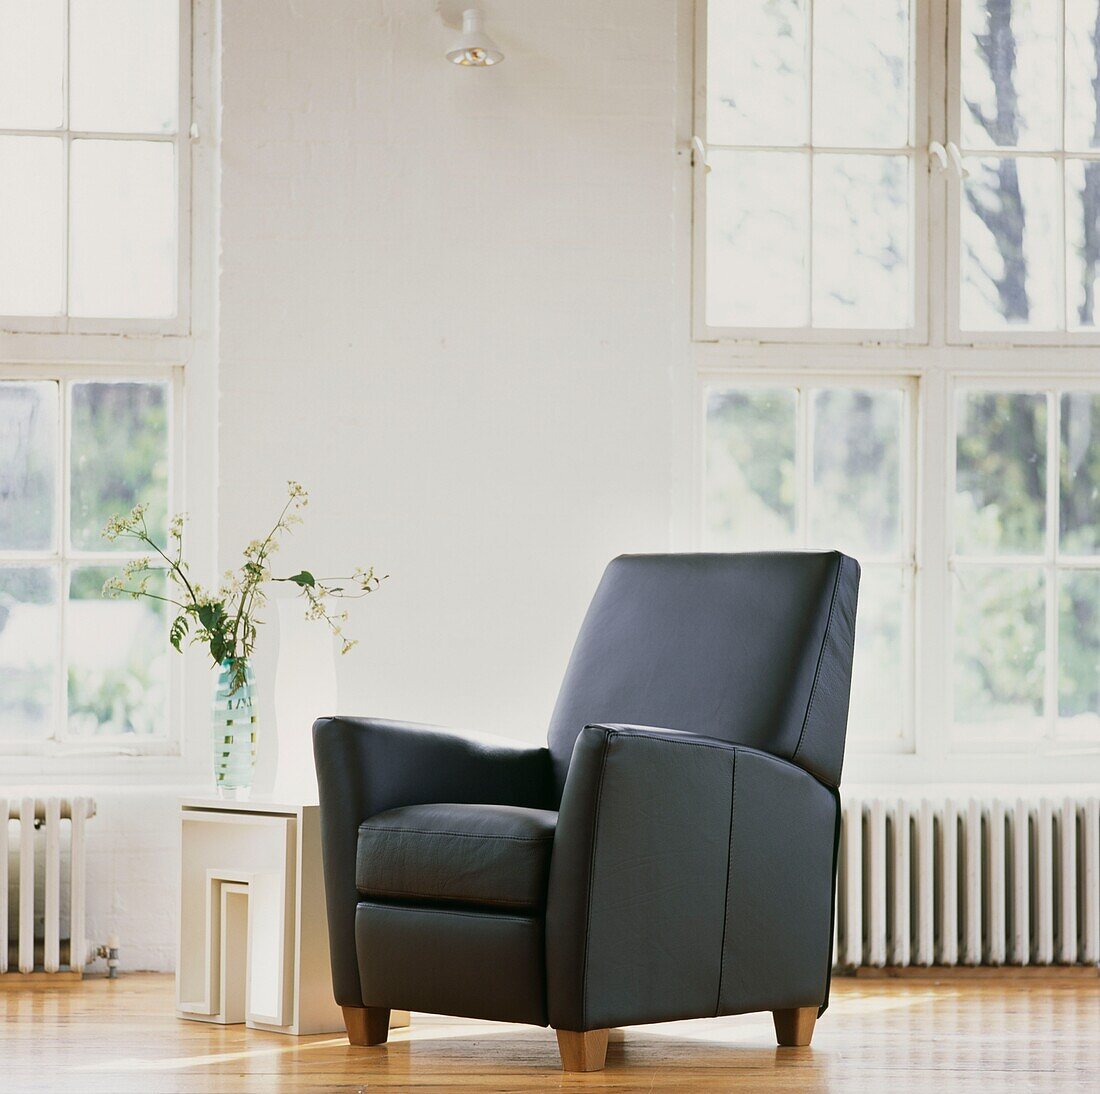 Black leather armchair and flower arrangement on nest of tables in white room with sunlit sash windows